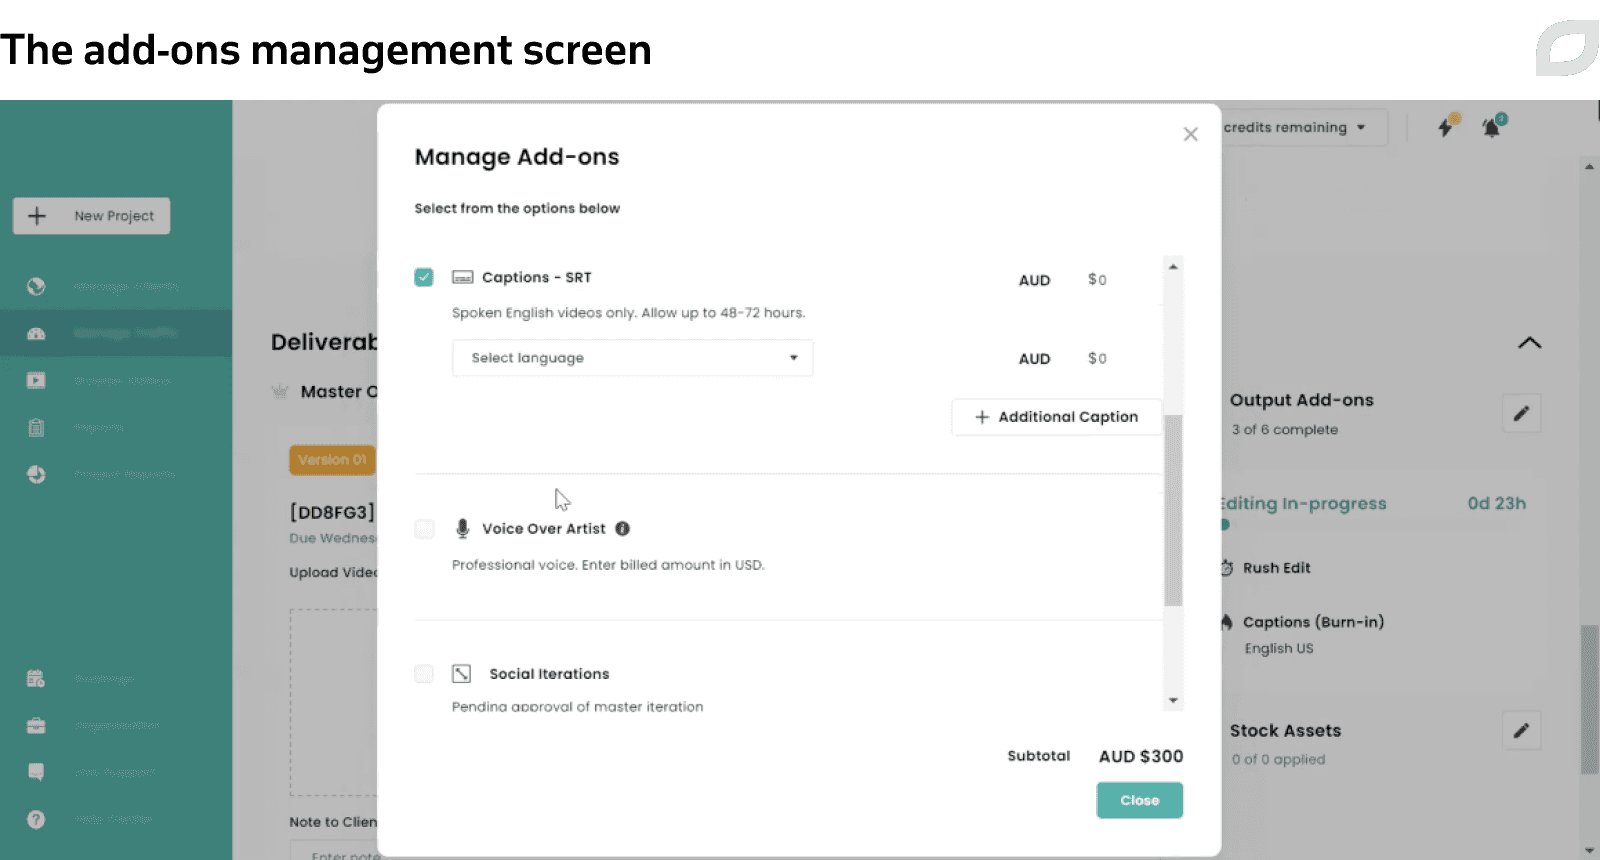 The add-ons management screen